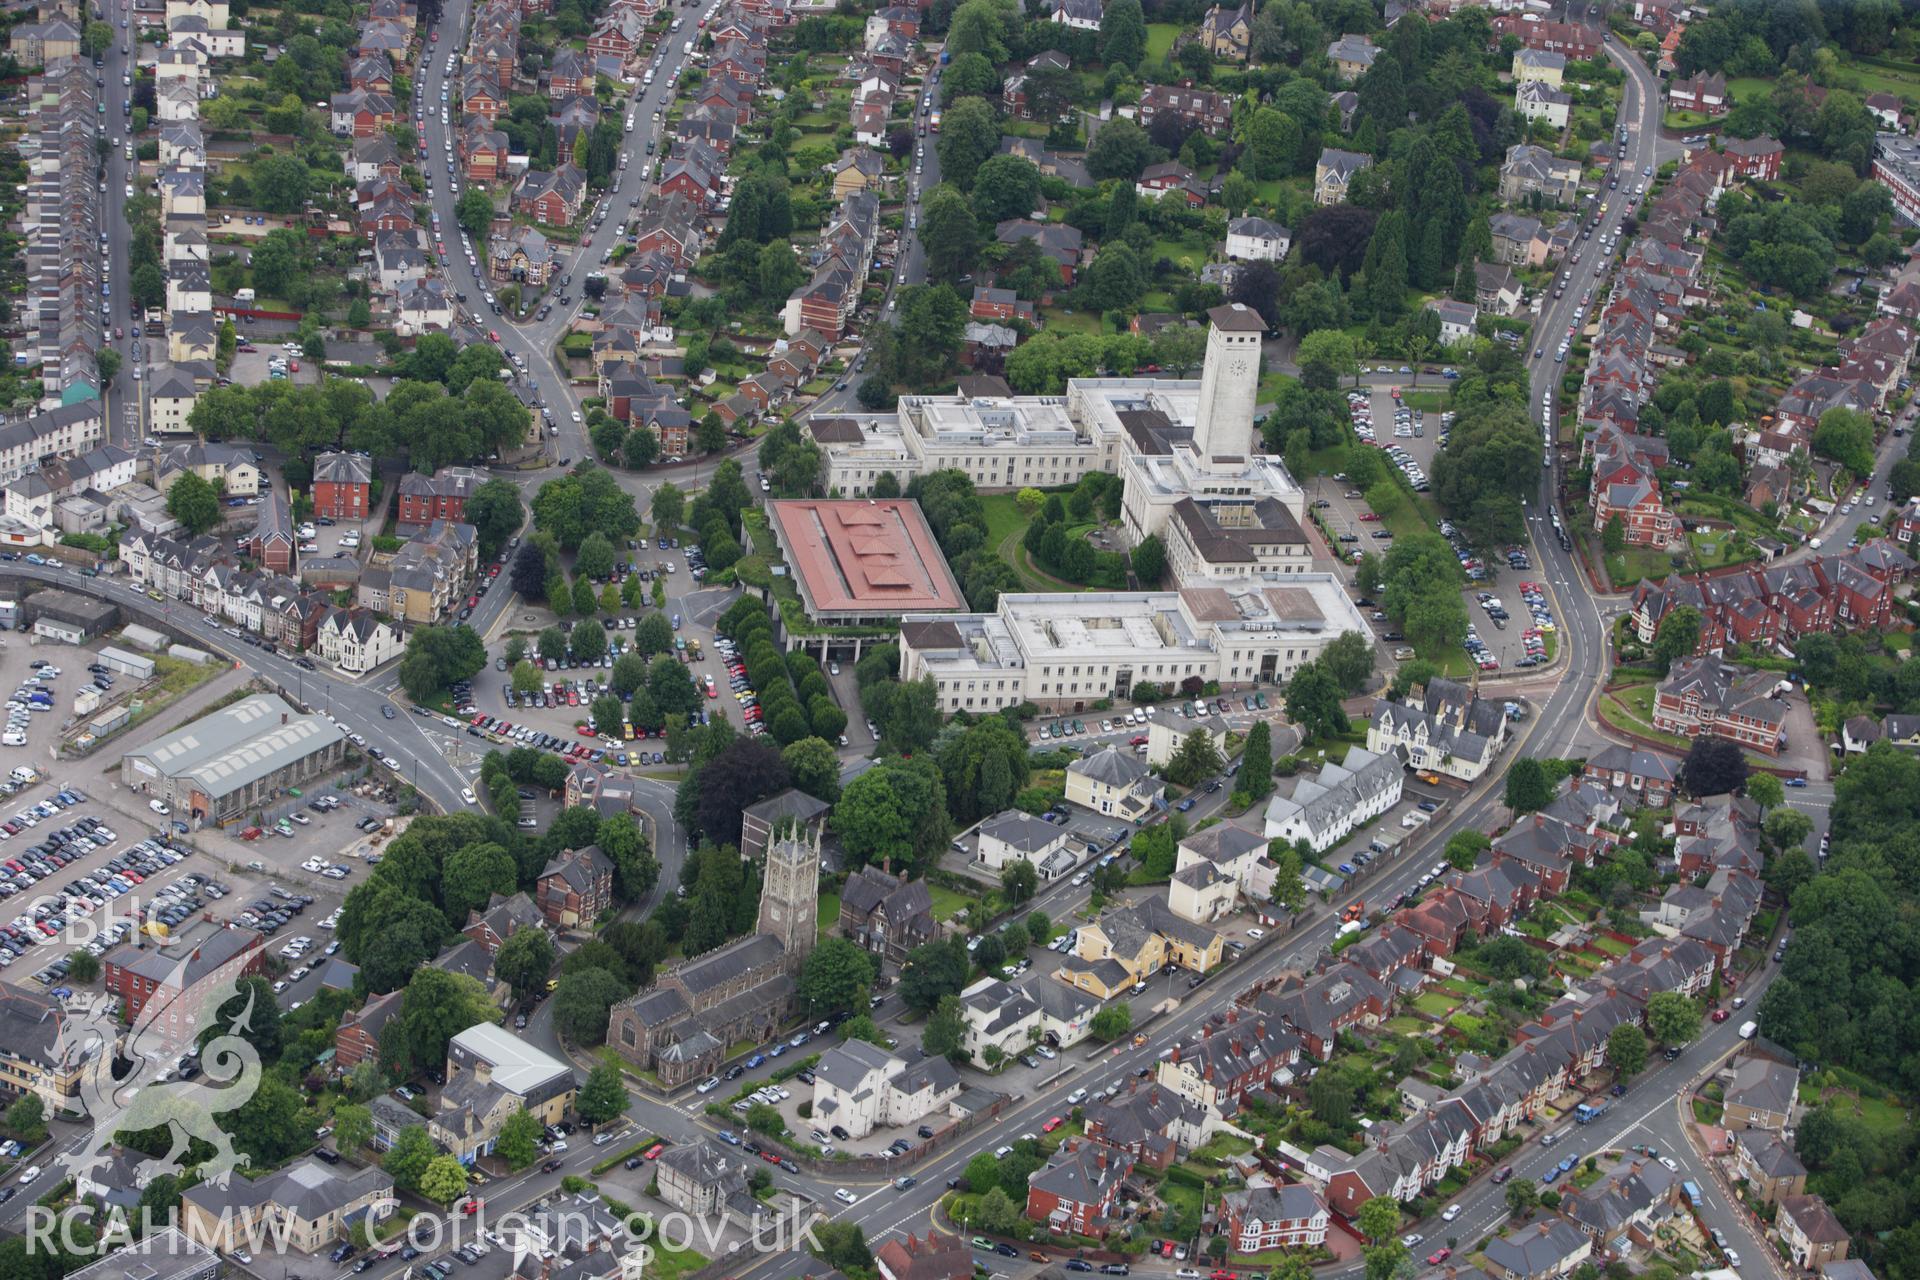 RCAHMW colour oblique aerial photograph of Newport Civic Centre, showing crown Court buildings. Taken on 09 July 2009 by Toby Driver